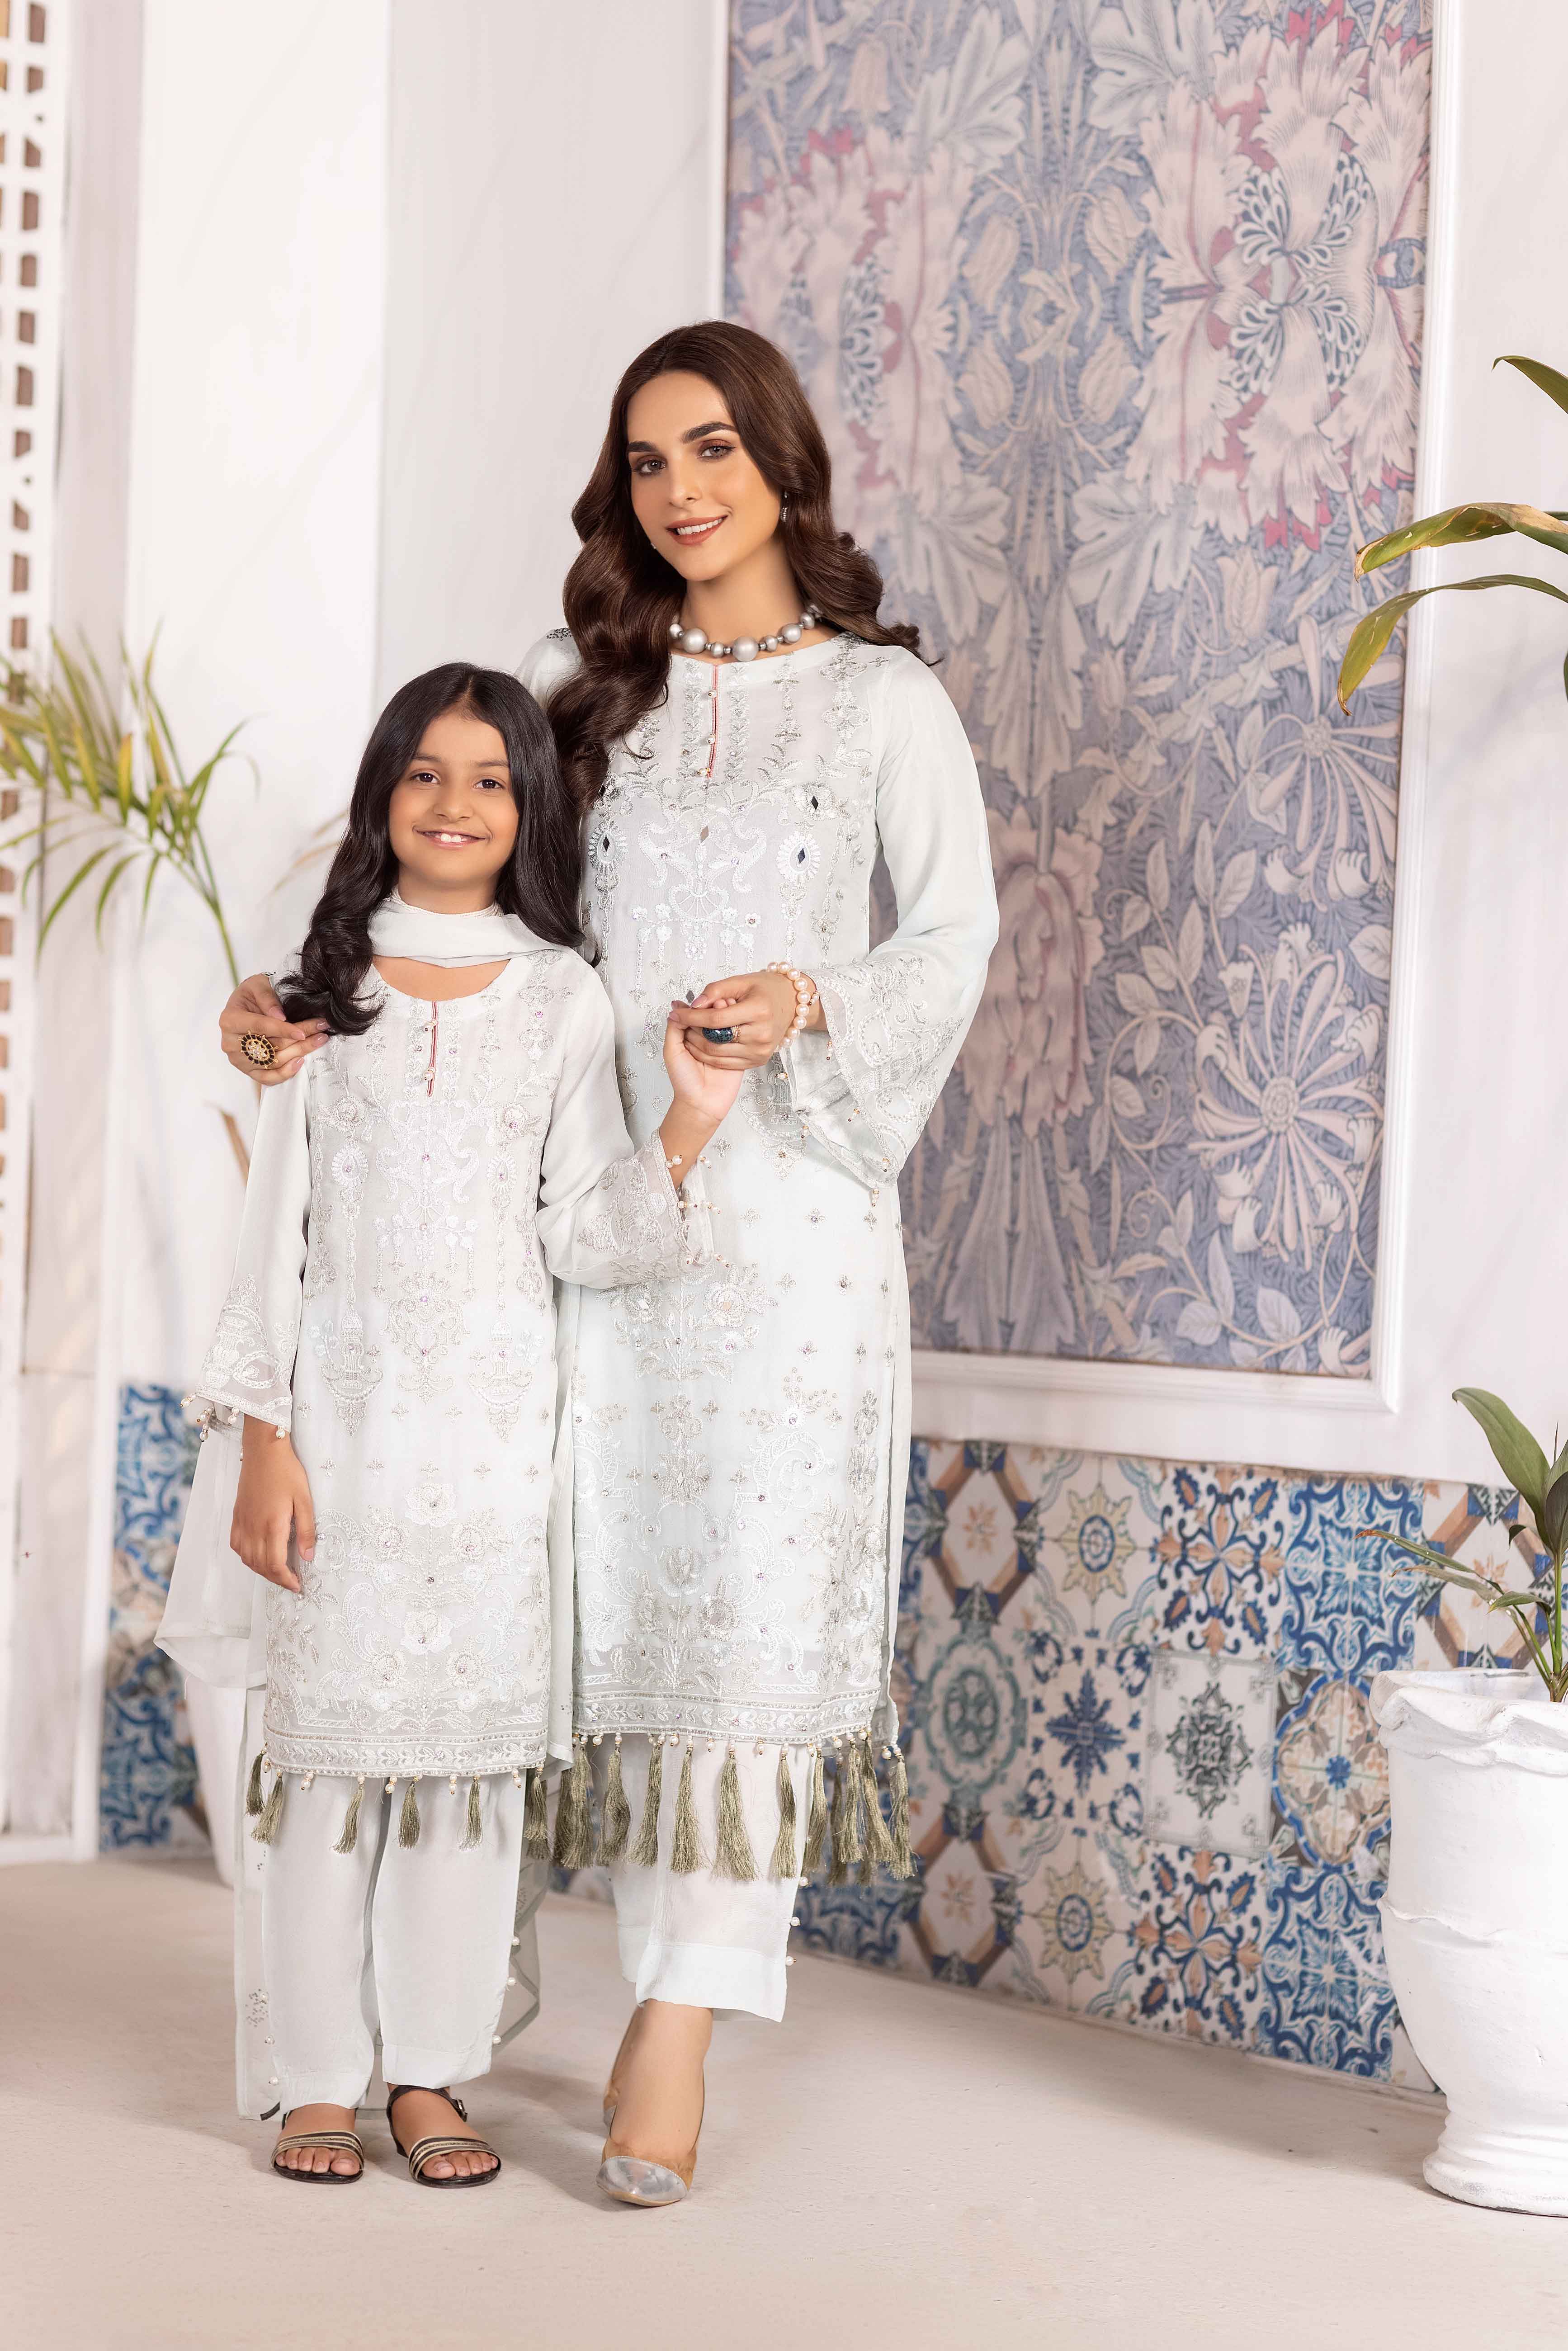 Simrans Girls Mother & Daughter Chiffon Eid Outfit Ice Flow DesiP 